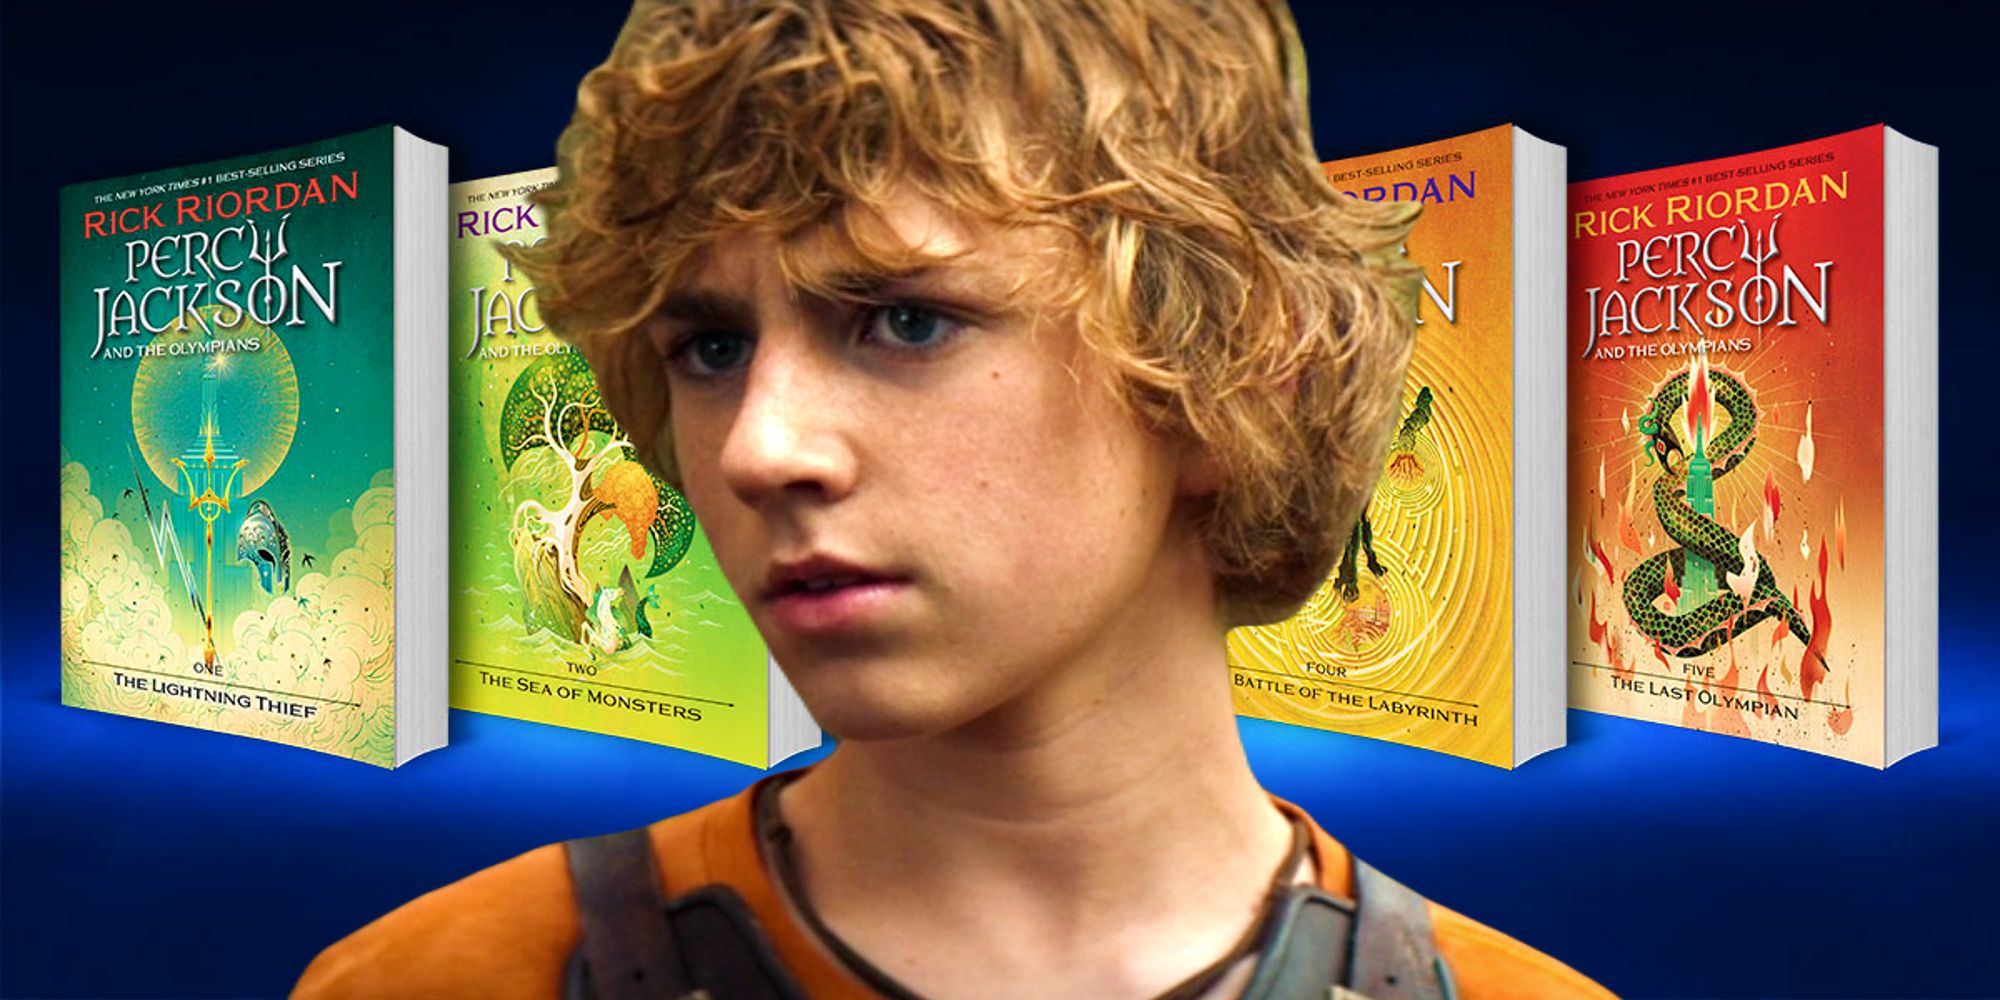 Walker Scobell as Percy Jackson from the Disney+ series above a line of the Percy Jackson books